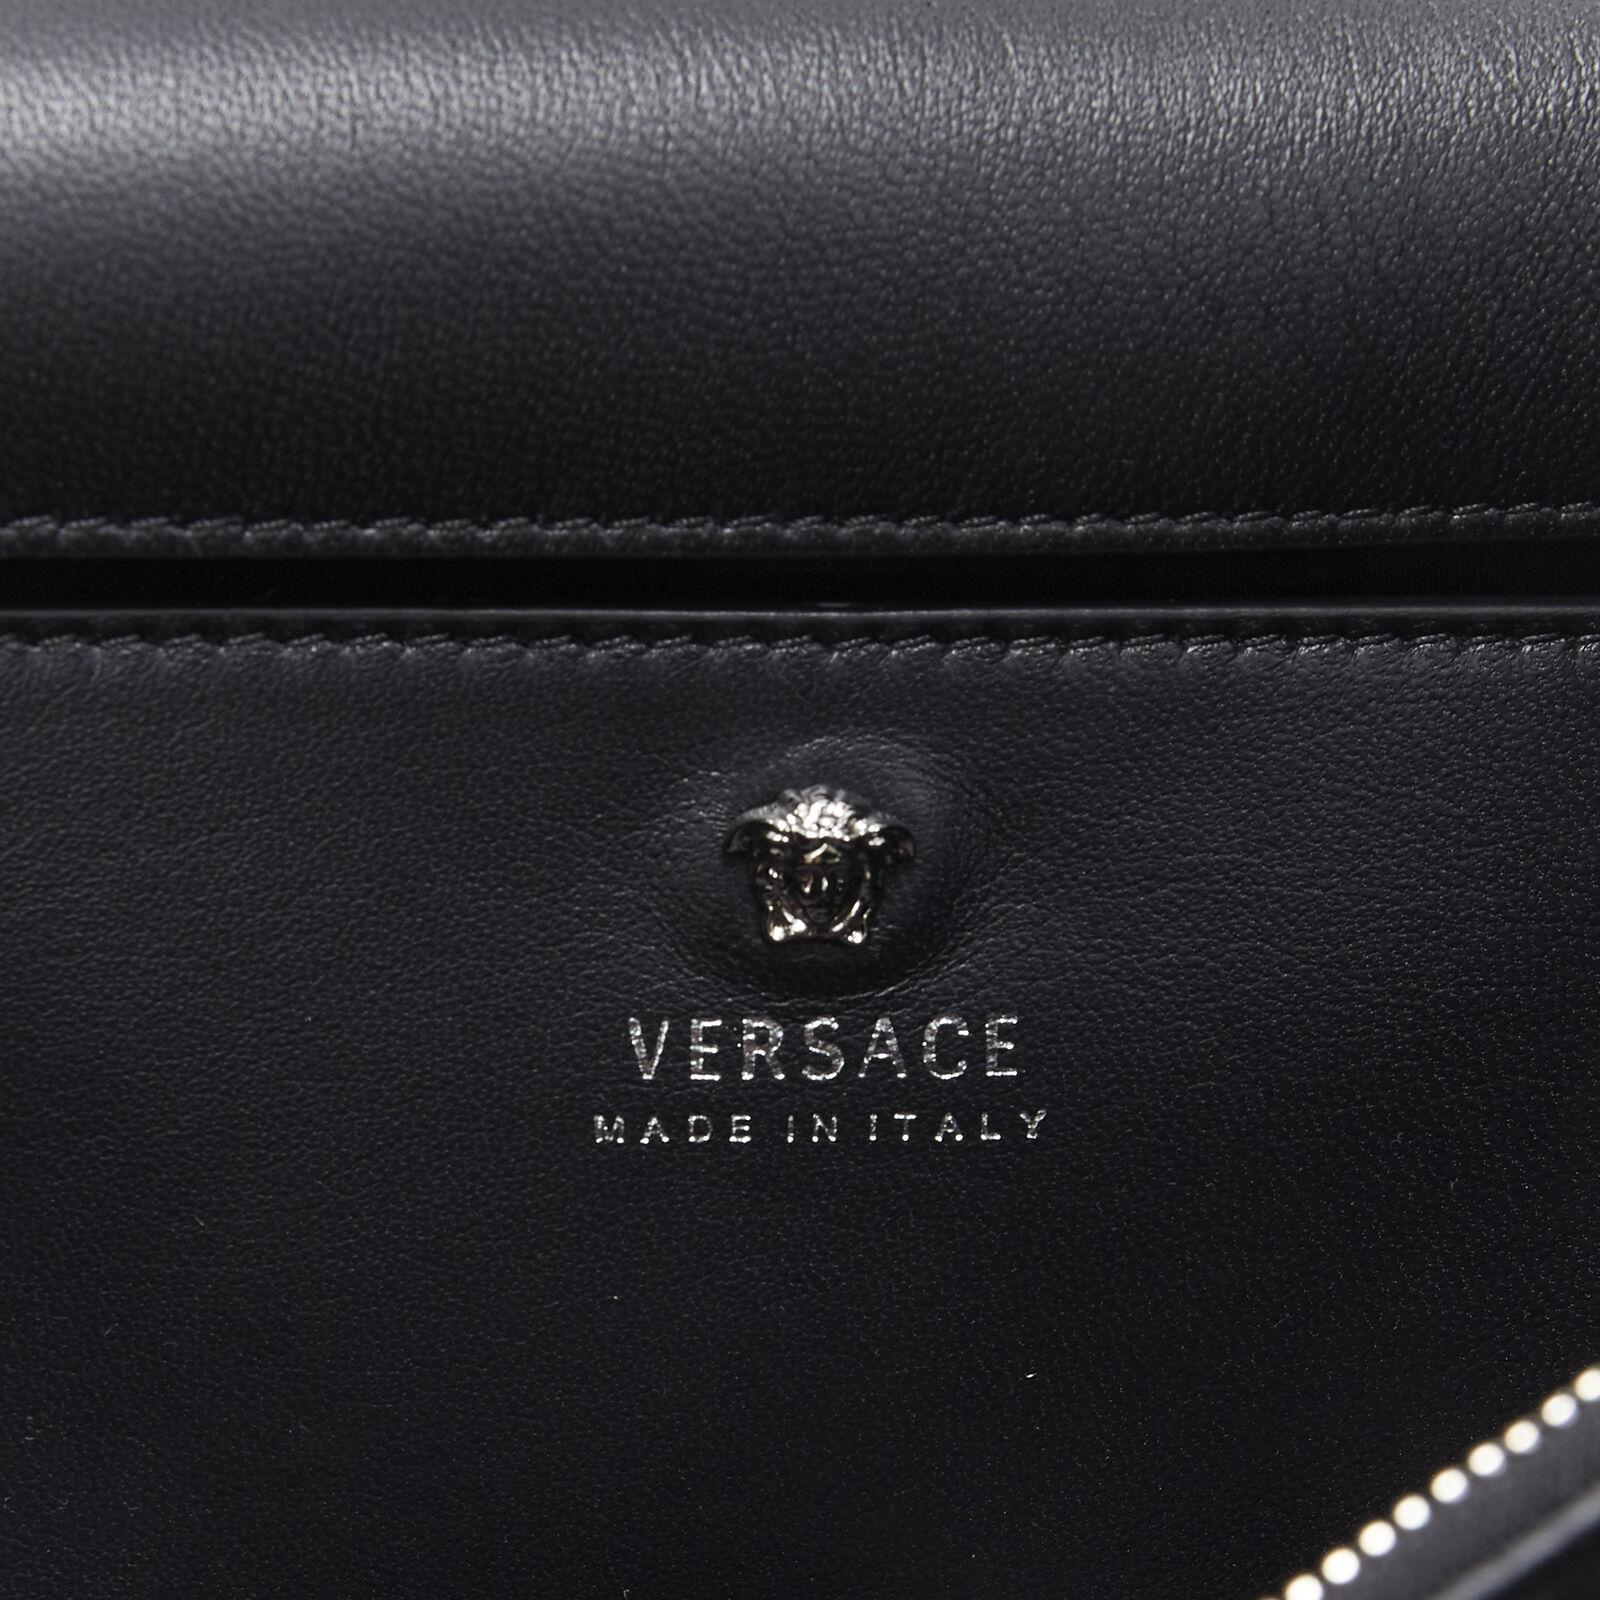 New Versace Palazzo Medusa black strass embellished flap silver chunky chain bag 7